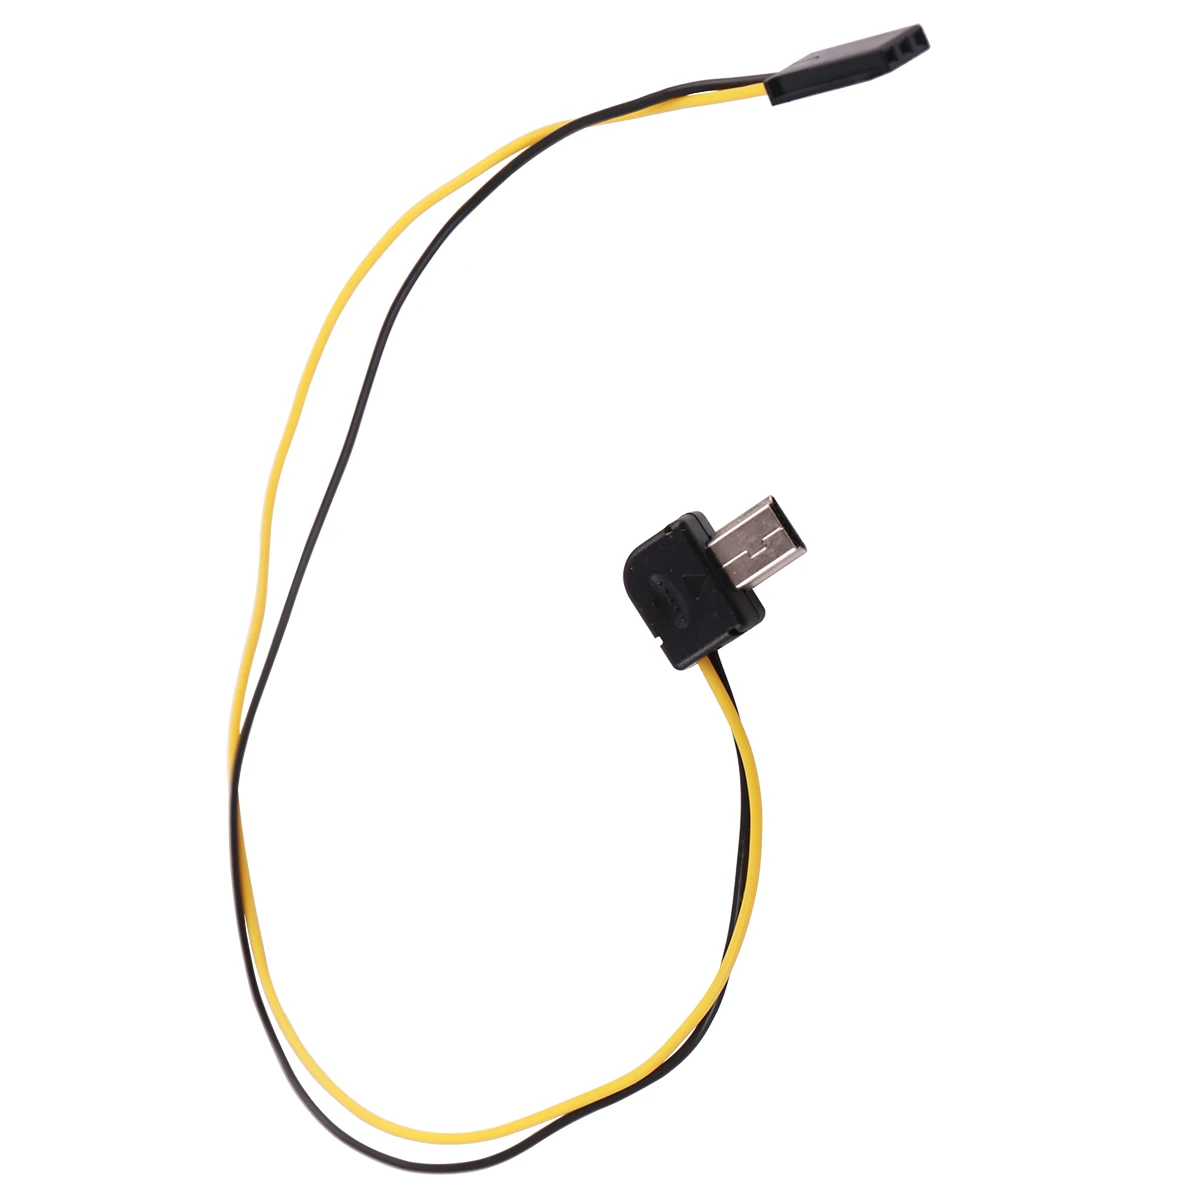 

Gopro3 Video Output Line FPV Connector Cable AV Video Real-time Output Cable for Gopro 5.8G Transmitter